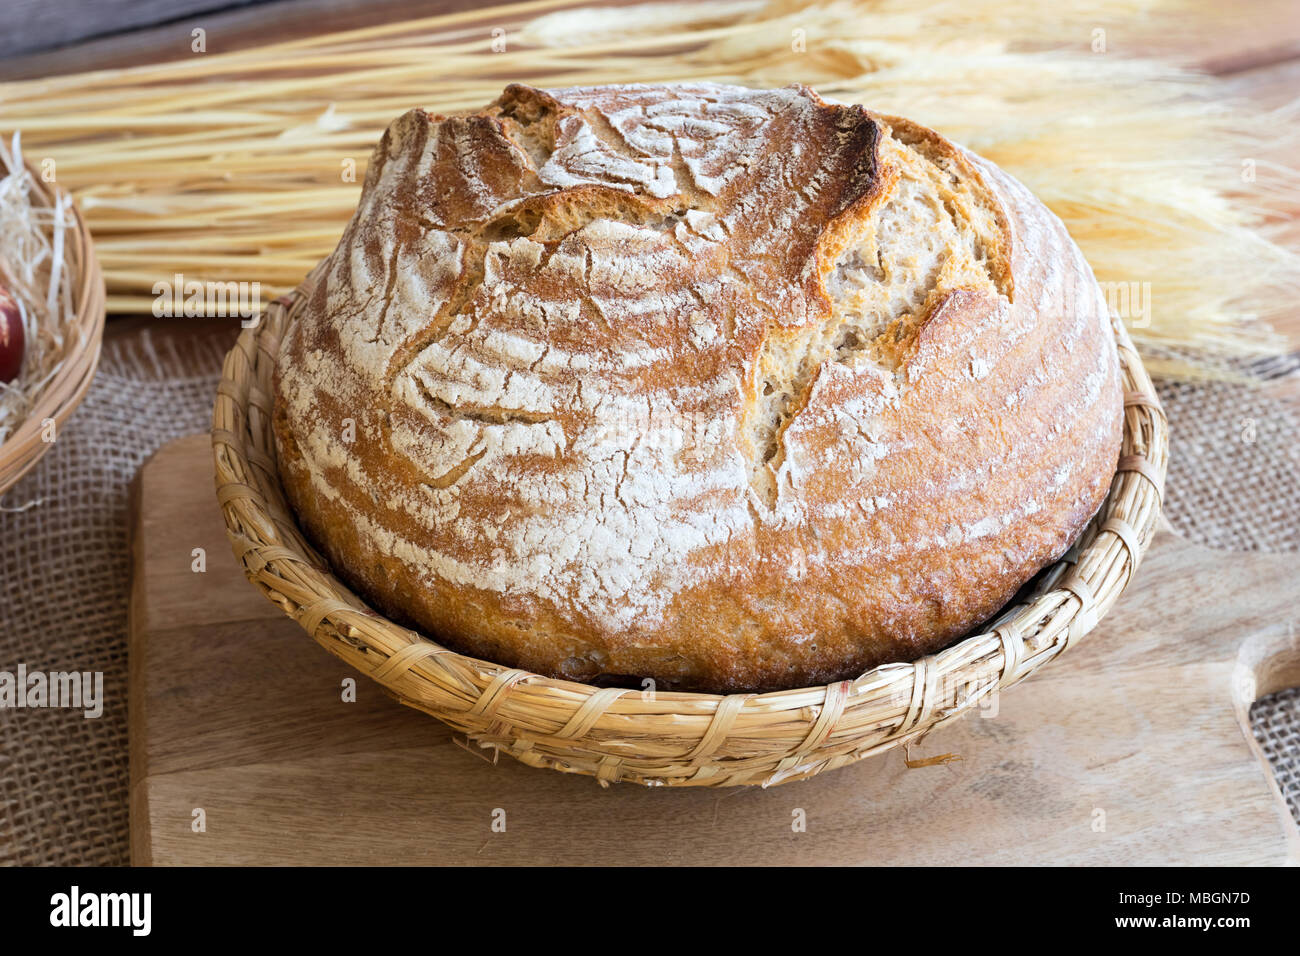 A loaf of sourdough bread in a basket Stock Photo